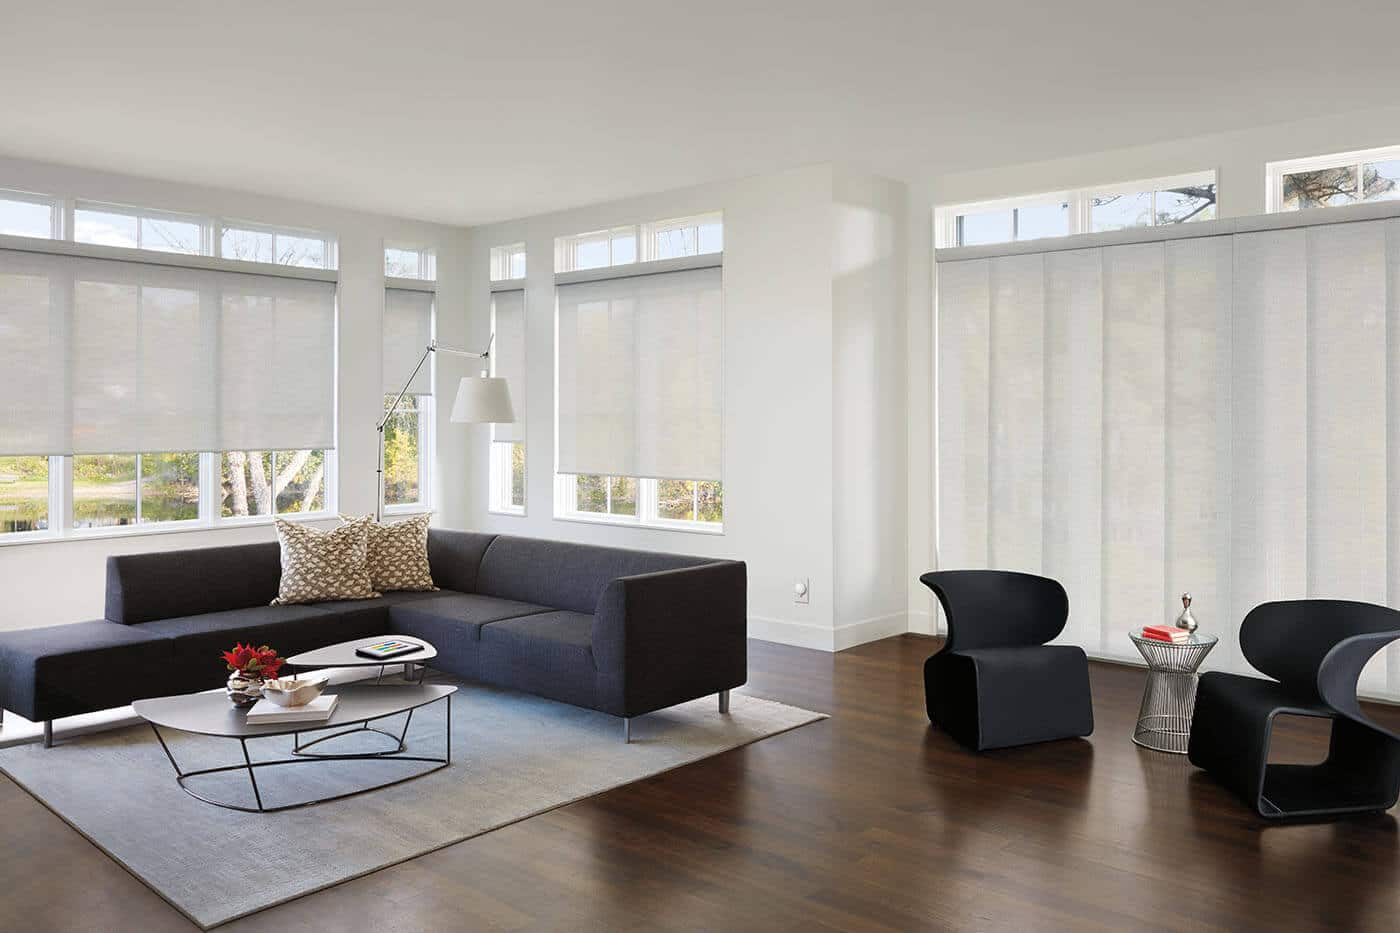 Stylish and functional Glide Blinds in modern living room for relaxed and casual look. Handcrafted to cover large windows. For sale in our Sydney Showroom.